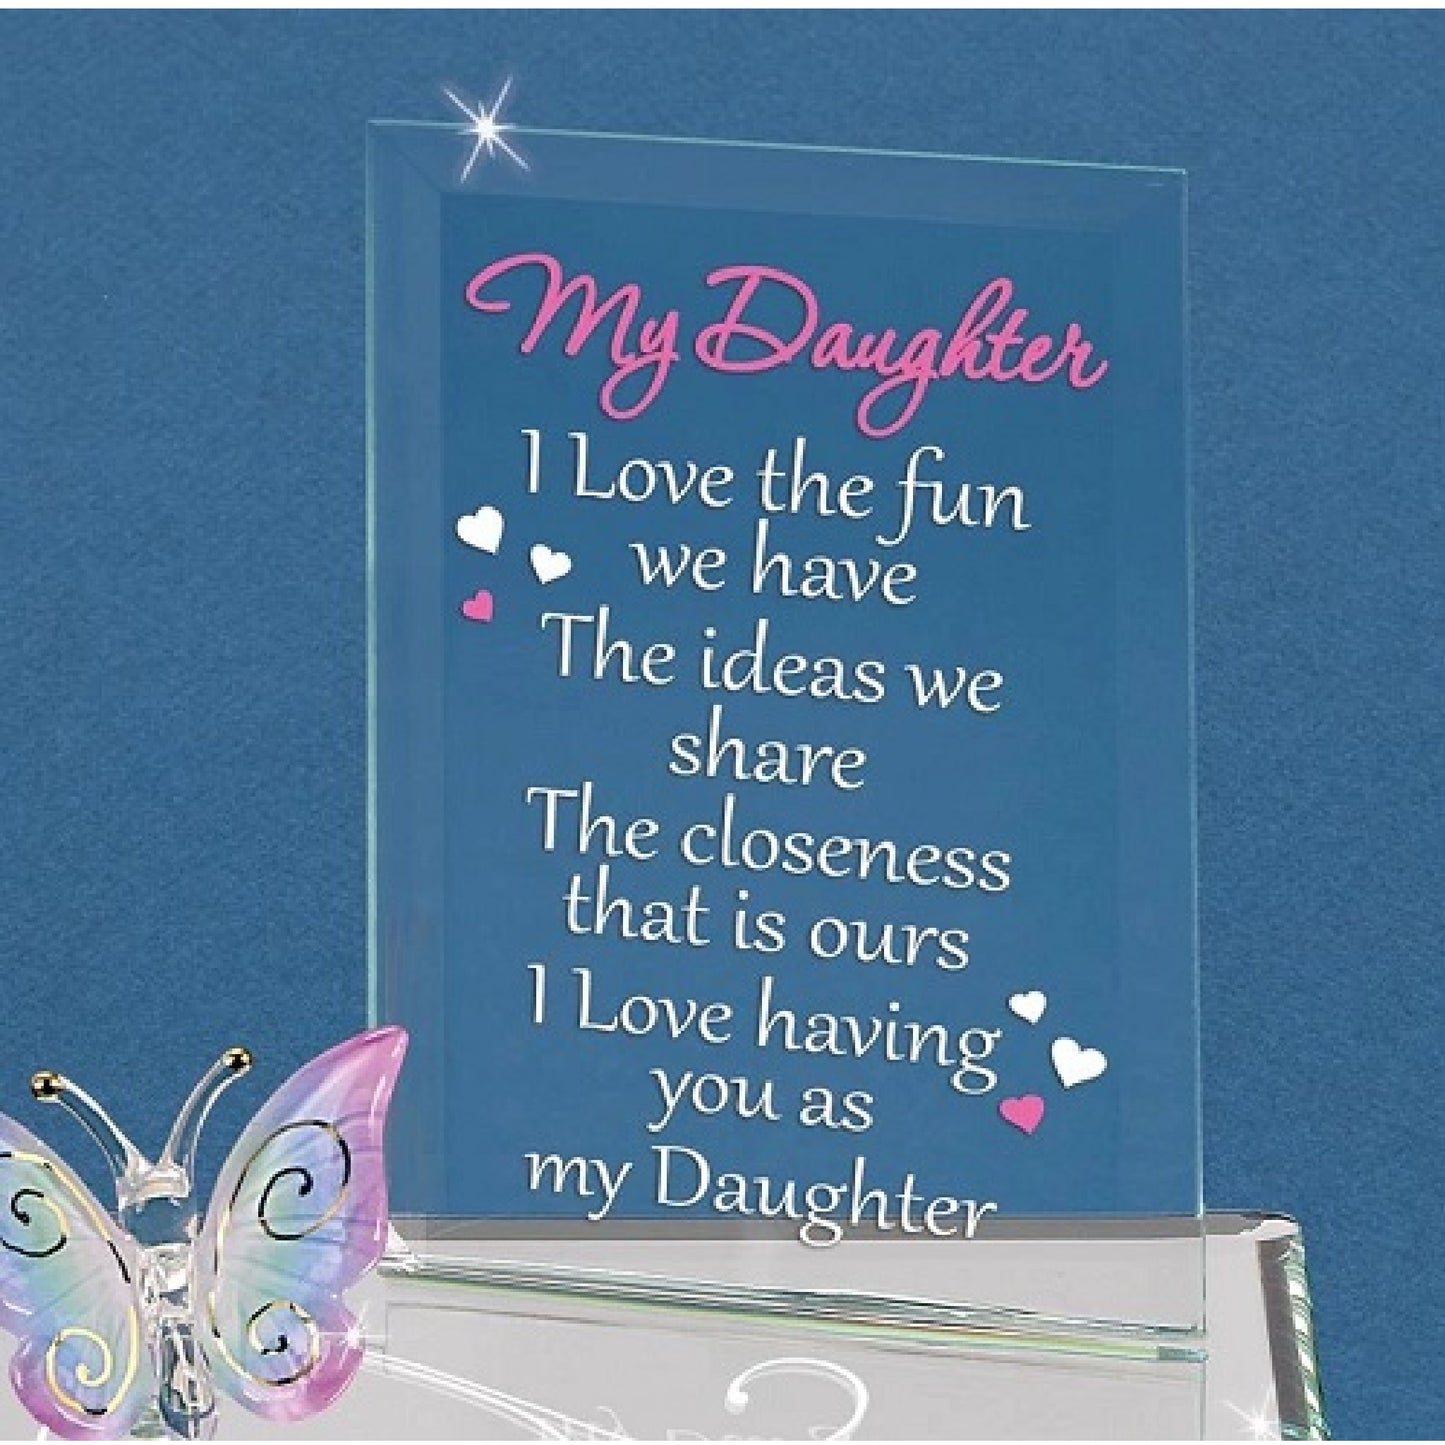 Glass Baron "My Daughter" Plaque